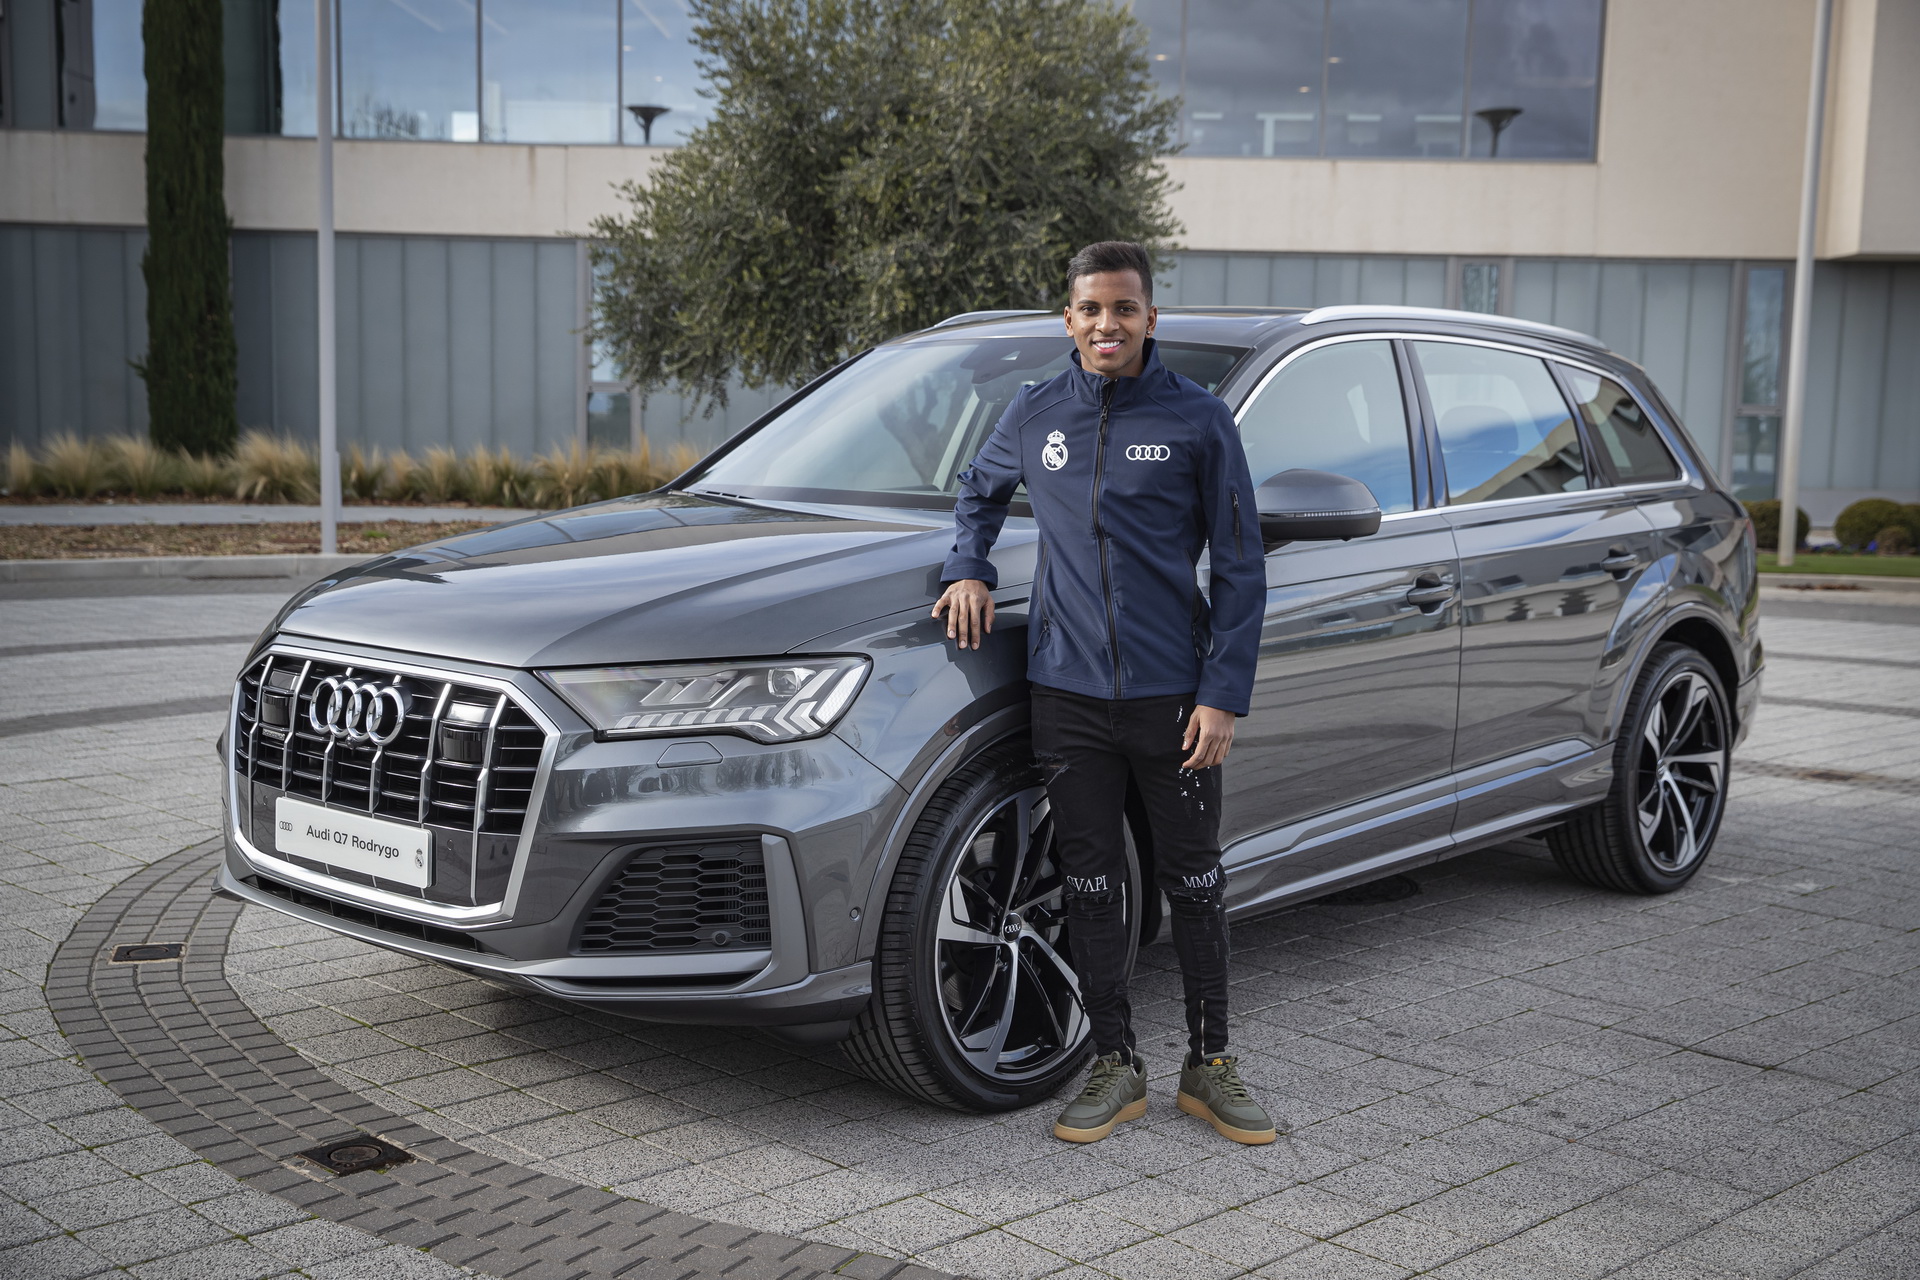 Real Madrid Players Take Delivery Of Their Free Audi Cars | Carscoops